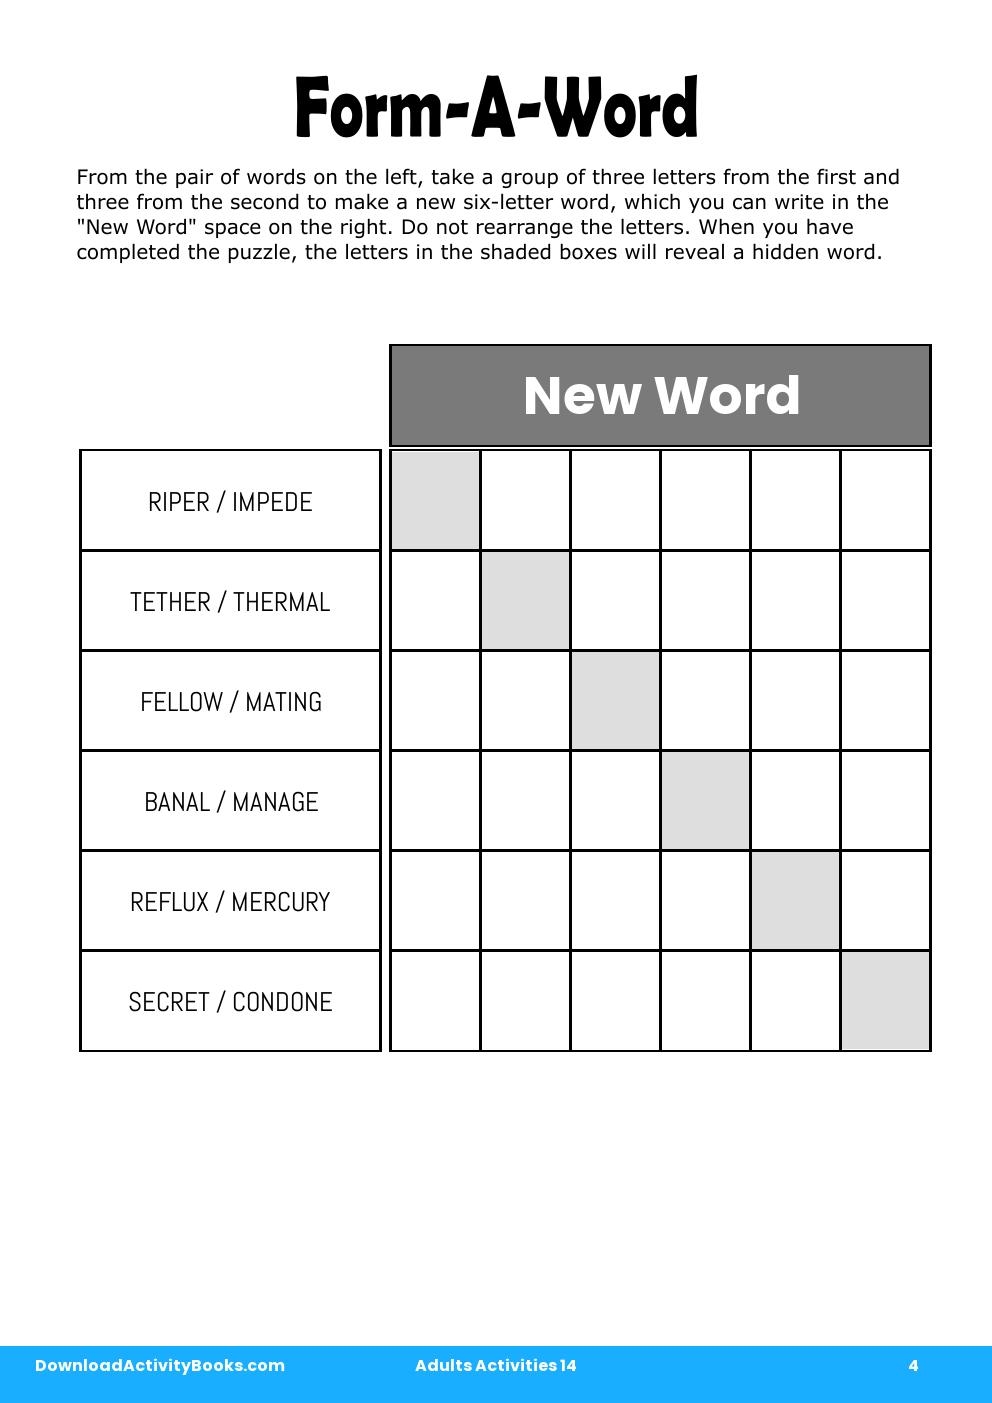 Form-A-Word in Adults Activities 14